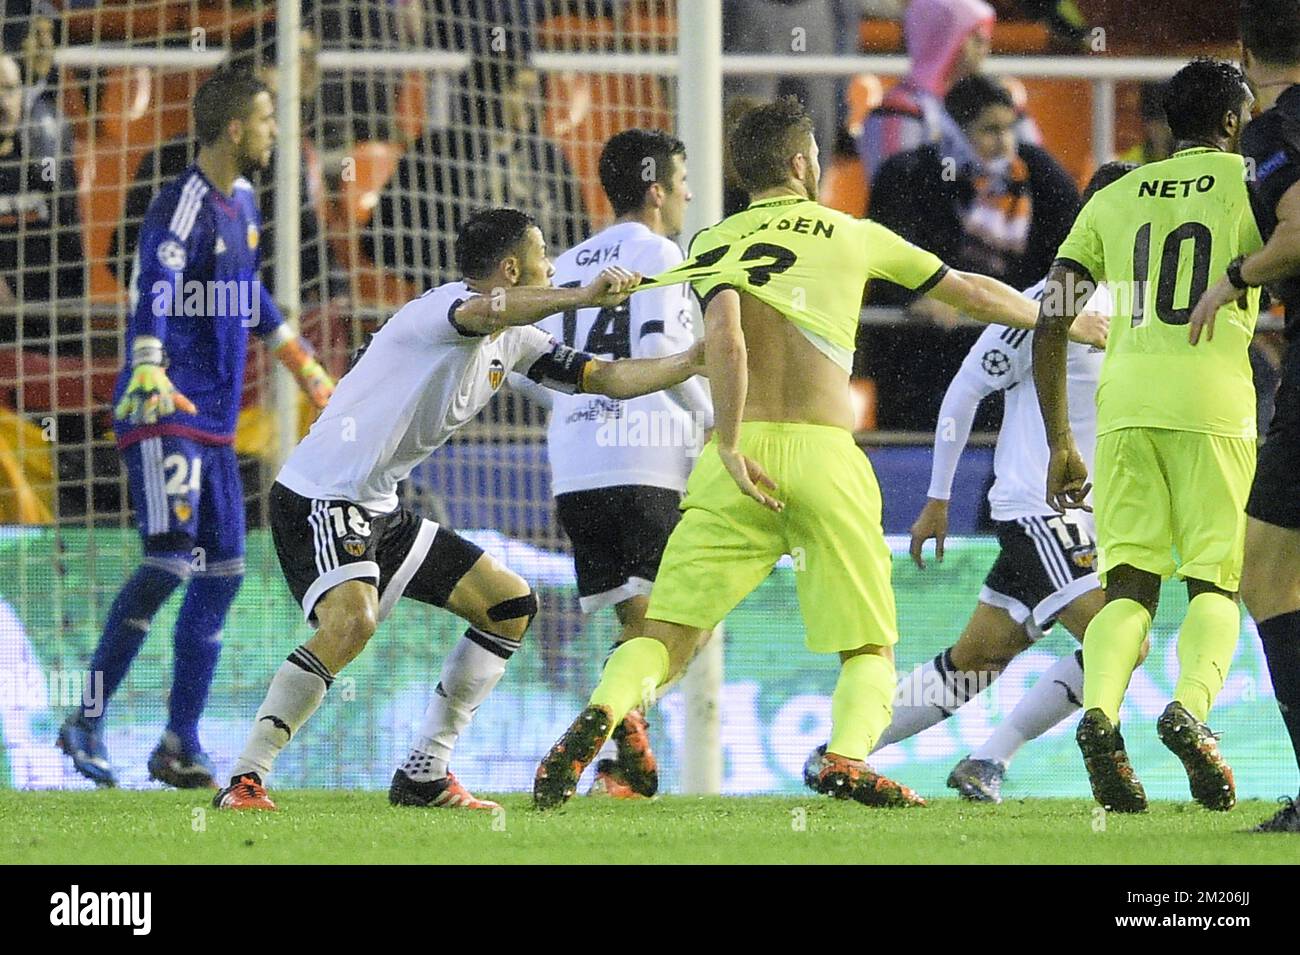 20151020 - VALENCIA, SPAIN: Valencia's Javi Fuego and Gent's Lasse Nielsen fight for the ball during a soccer game between Spanish club Valencia CF and Belgian team KAA Gent in Valencia, Spain, Tuesday 20 October 2015, game three in group H of the group stage of the UEFA Champions League tournament. BELGA PHOTO YORICK JANSENS Stock Photo